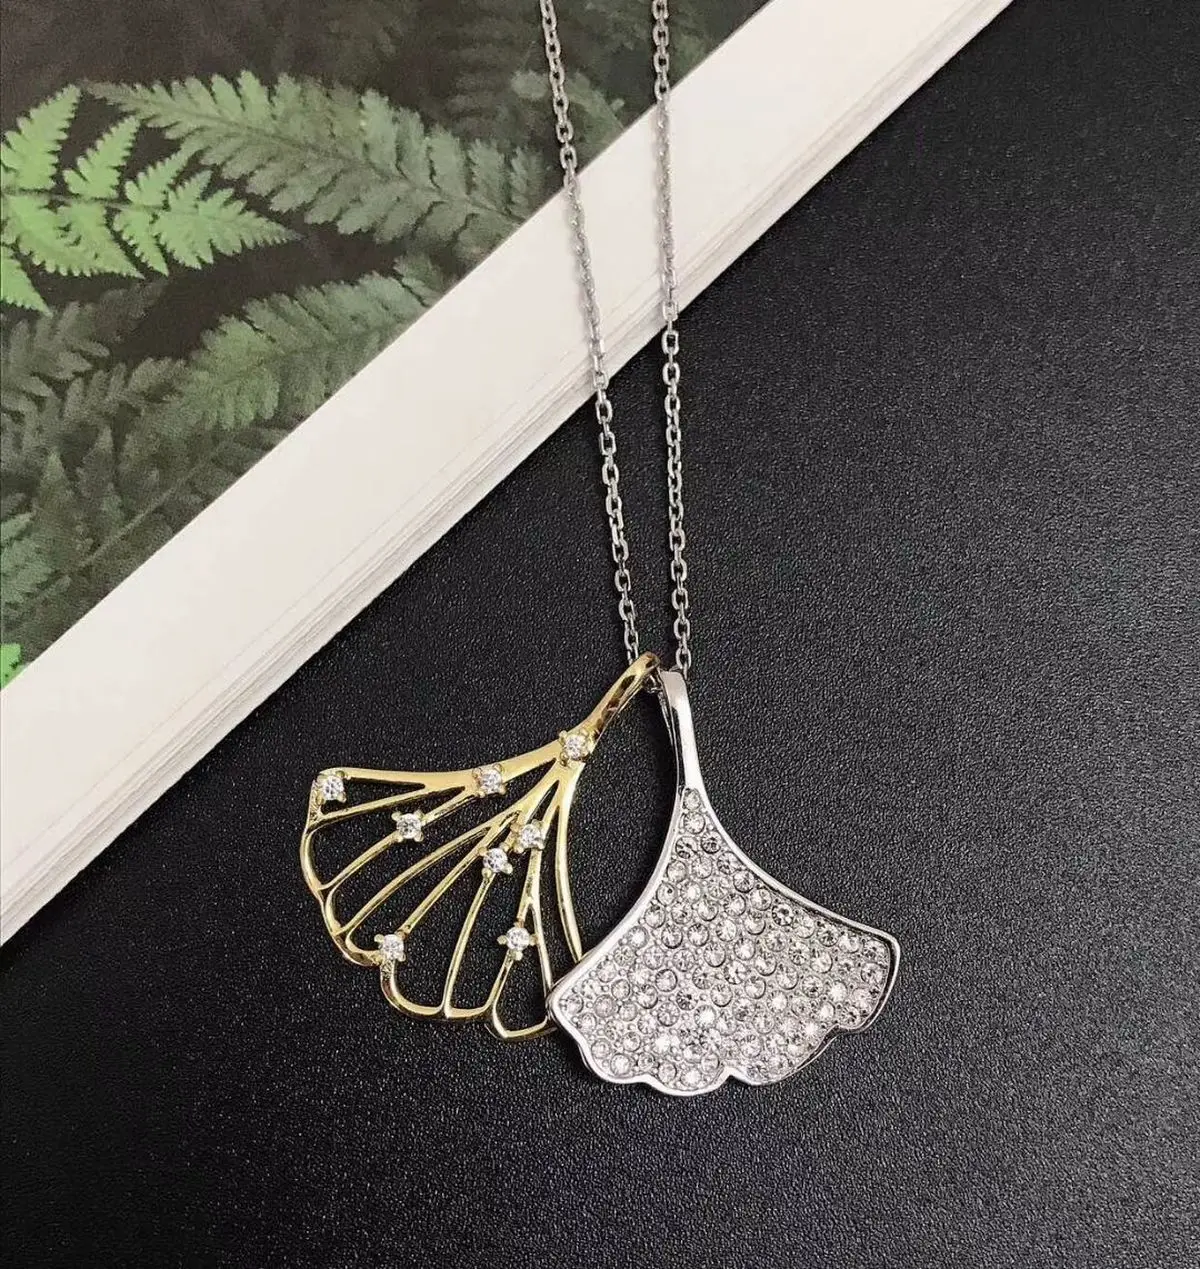 

High Quality SWA New Apricot Leaf Double-Layer Openwork Women's Necklace Charming Fashion Jewelry